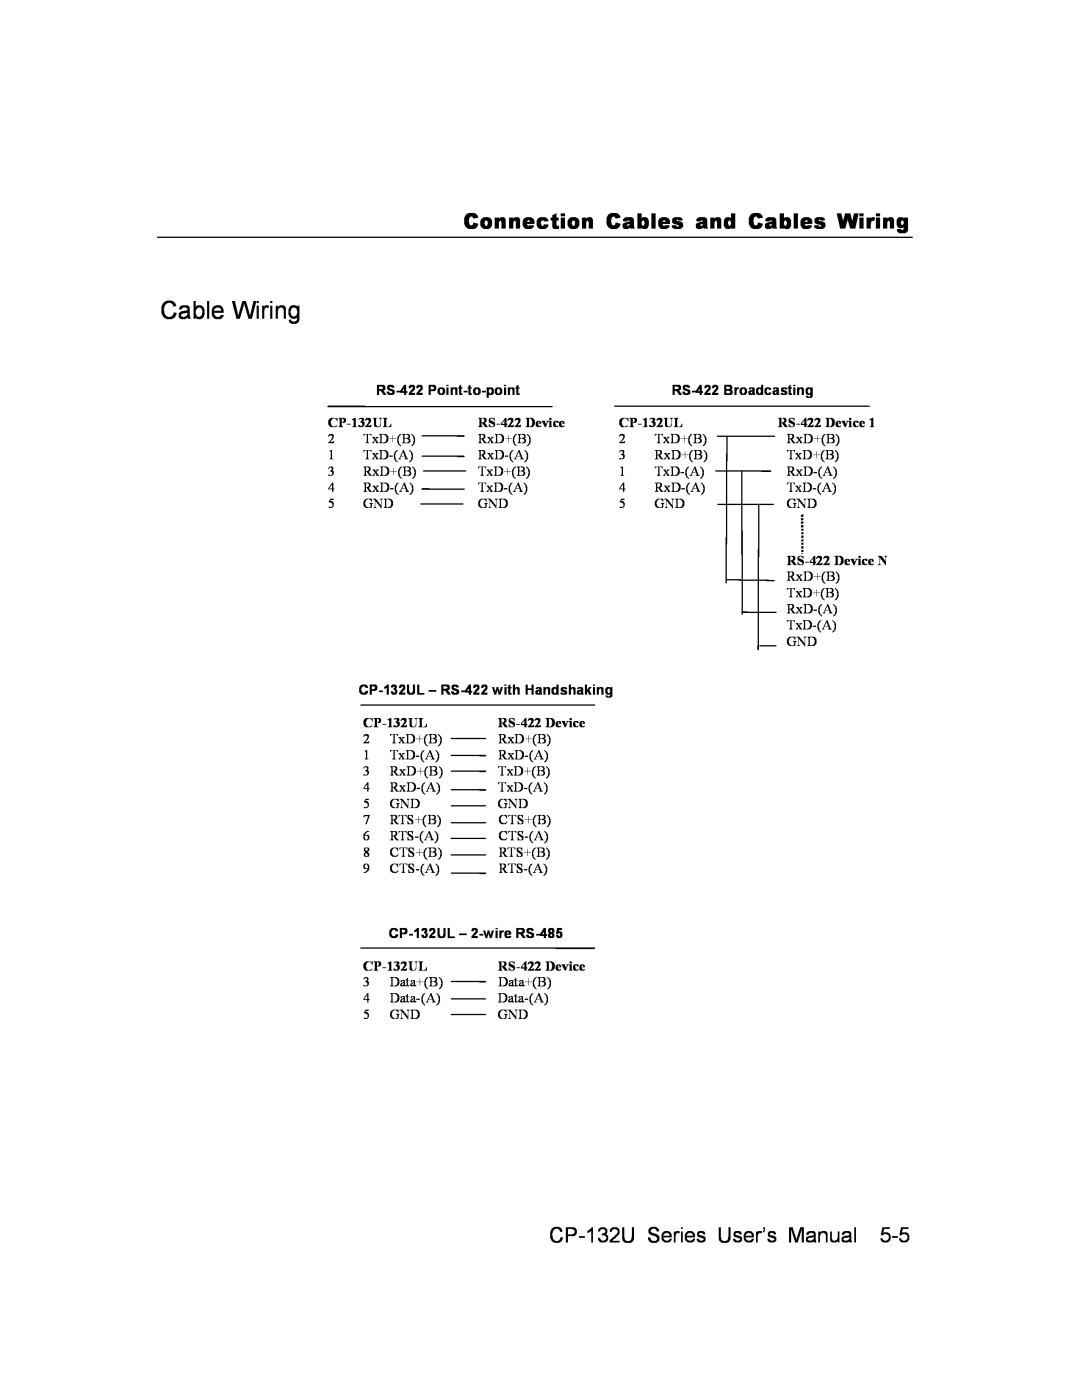 Moxa Technologies Cable Wiring, Connection Cables and Cables Wiring, CP-132U Series User’s Manual, RS-422 Broadcasting 